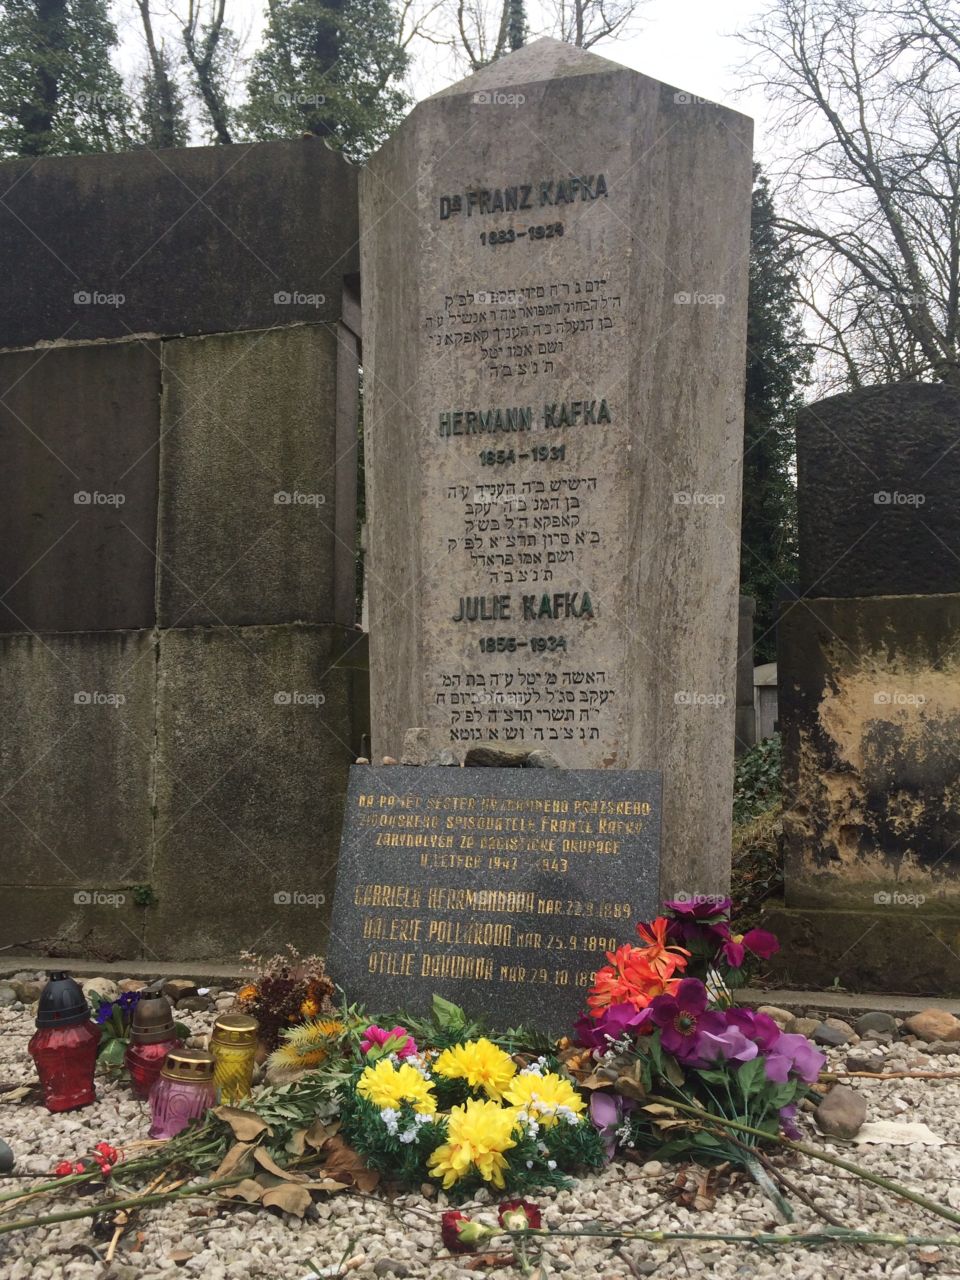 Franz Kafka’s grave site with decorations and flowers 